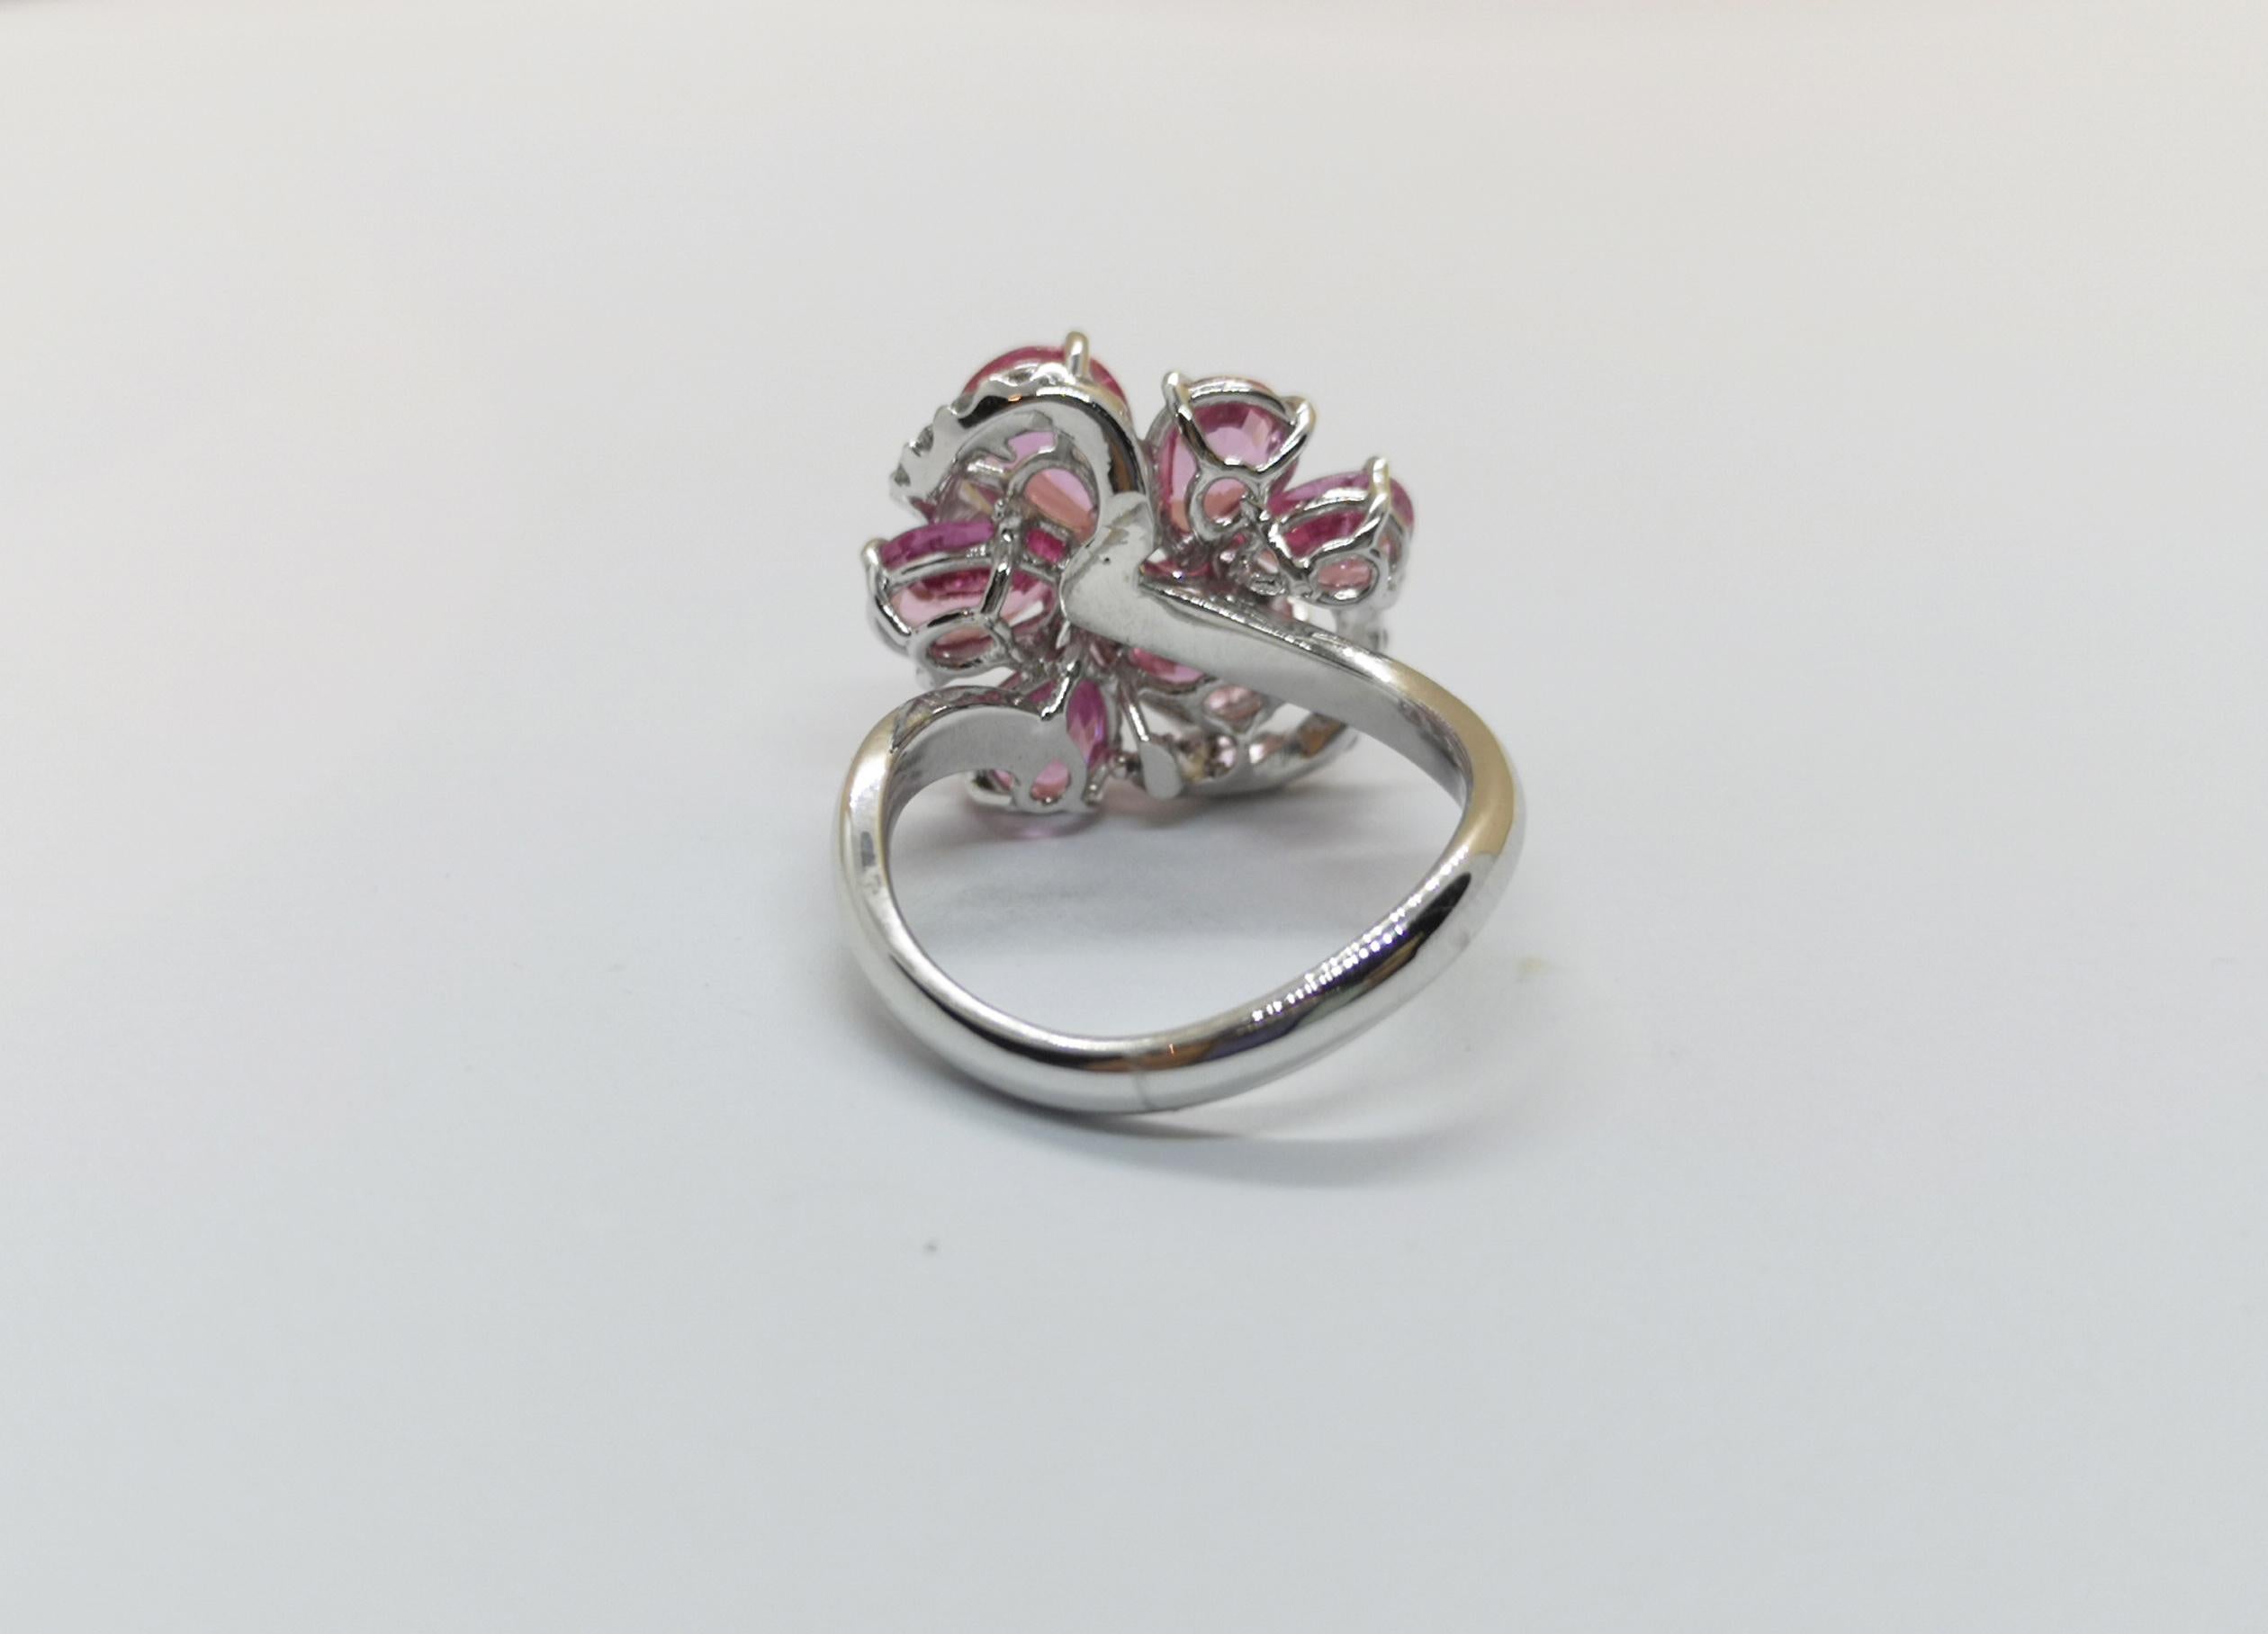 Pink Sapphire 4.94 carats with Diamond 0.35 carat Ring set in 18 Karat White Gold Settings

Width: 1.7 cm
Length: 1.6 cm 
Ring Size: 54

